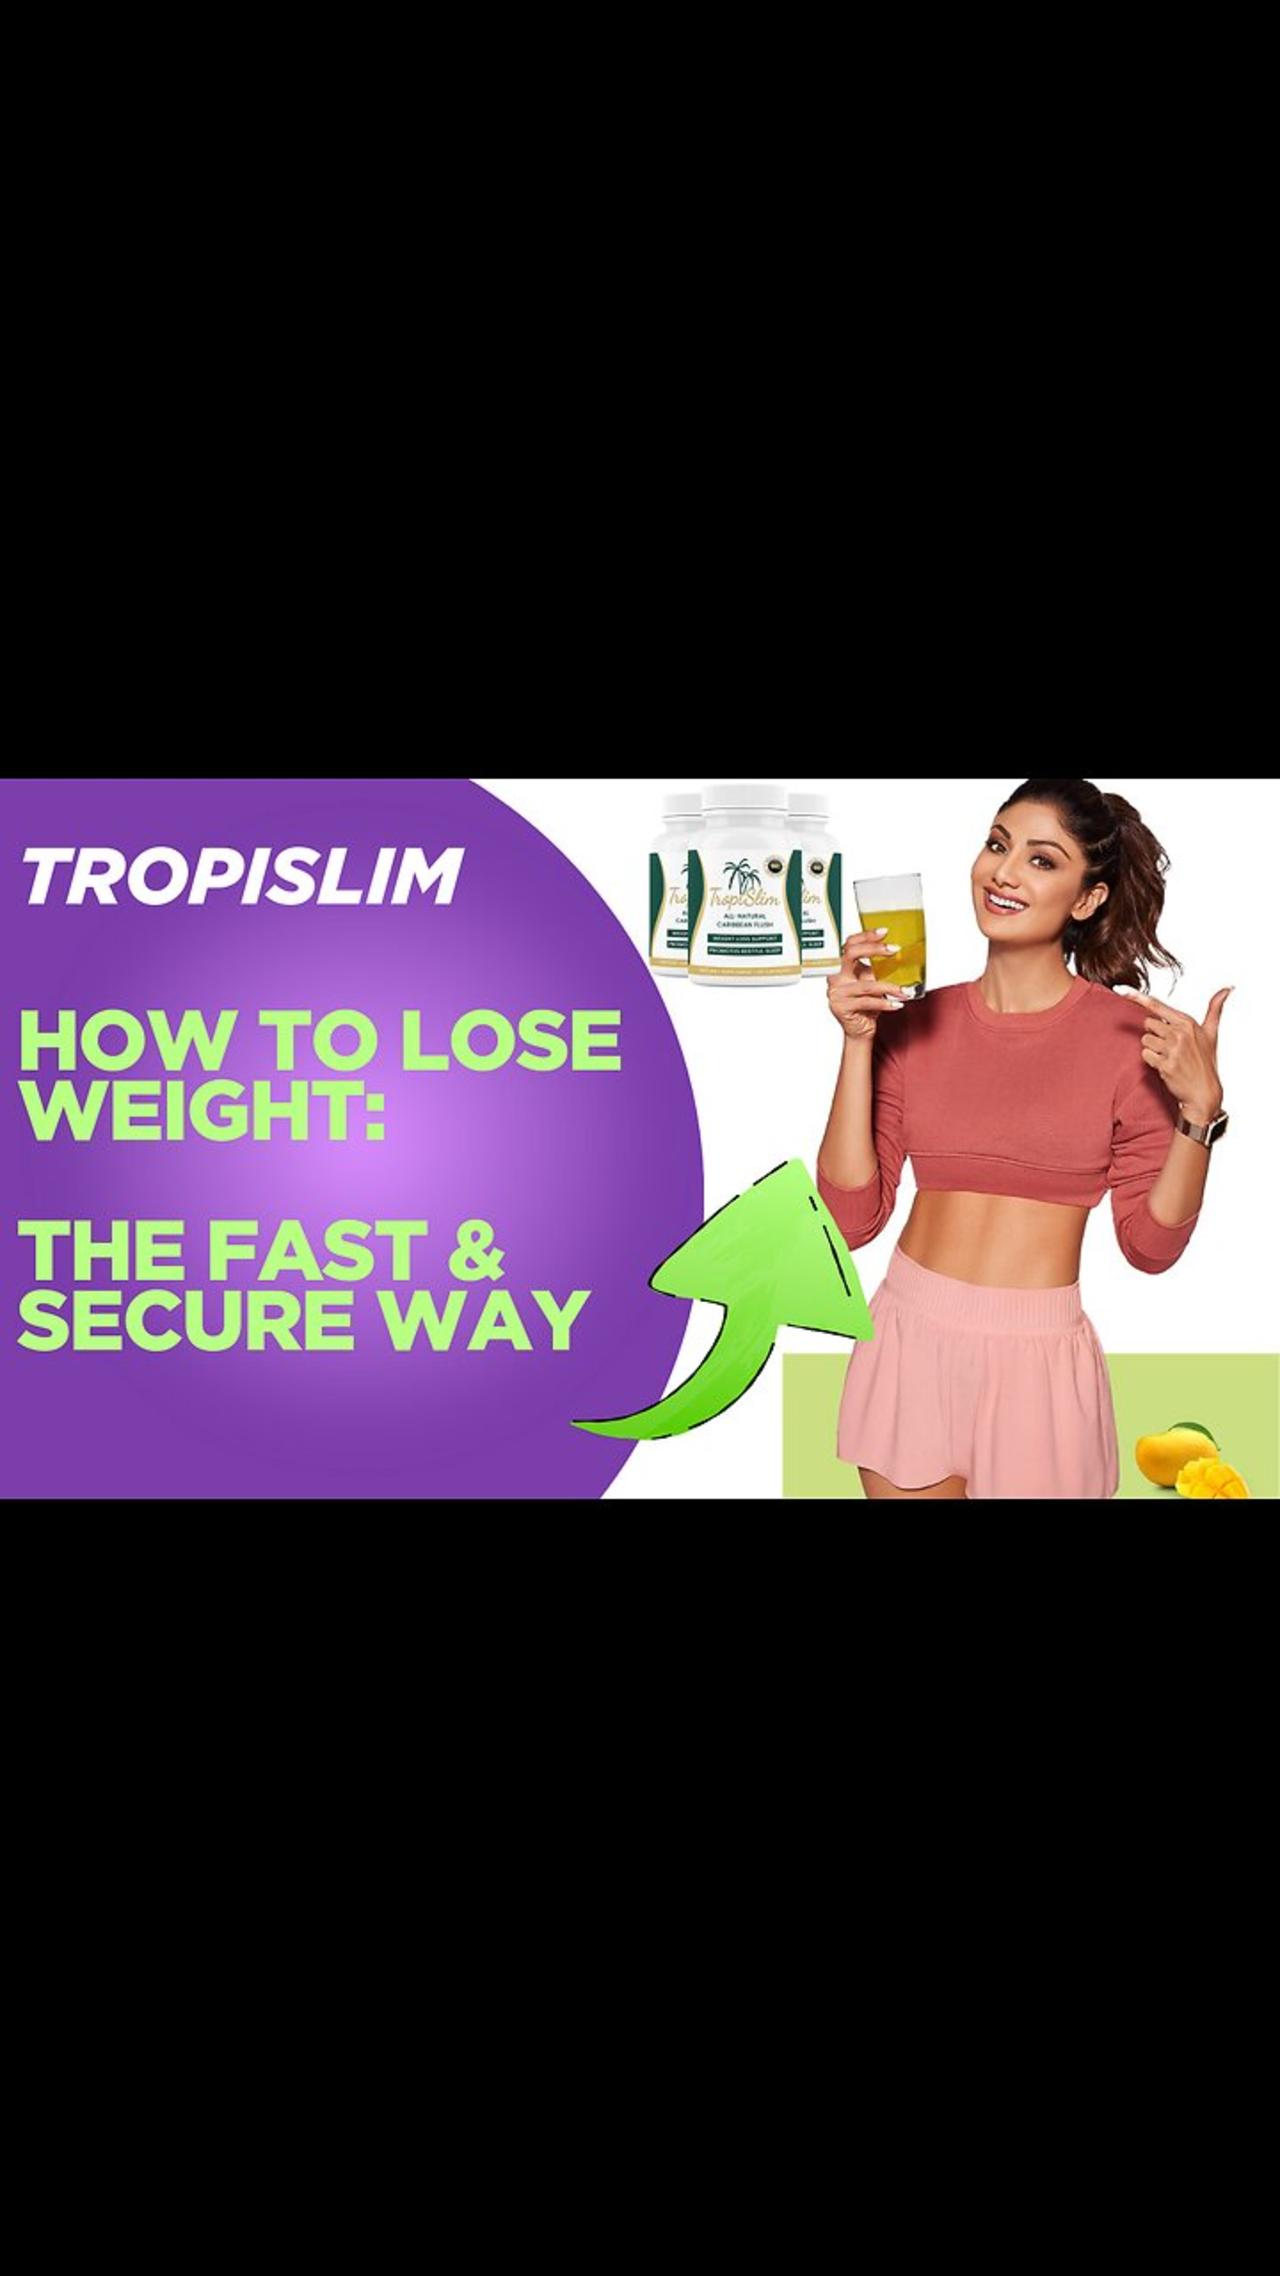 How To Lose Weight : The Fast & Secure Way